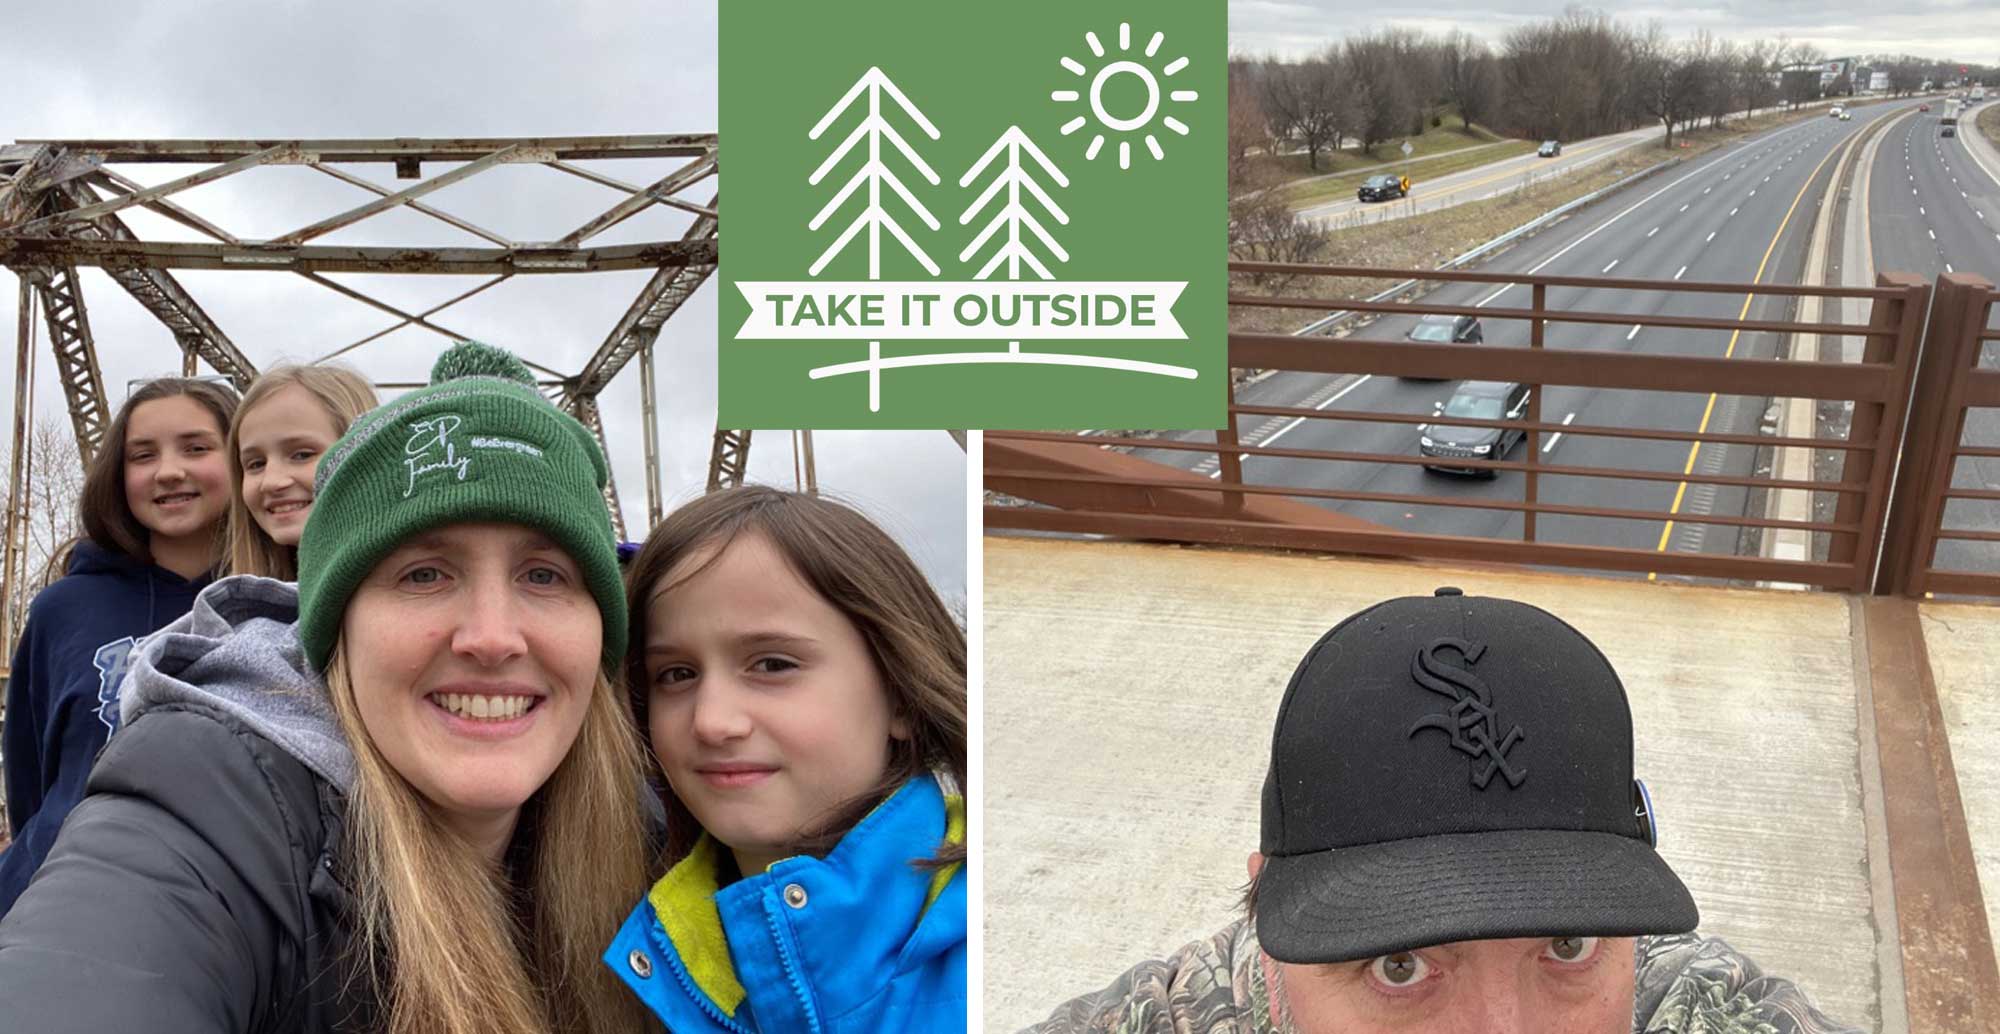 Participants take selfies as part of the Take It Outside Challenge.